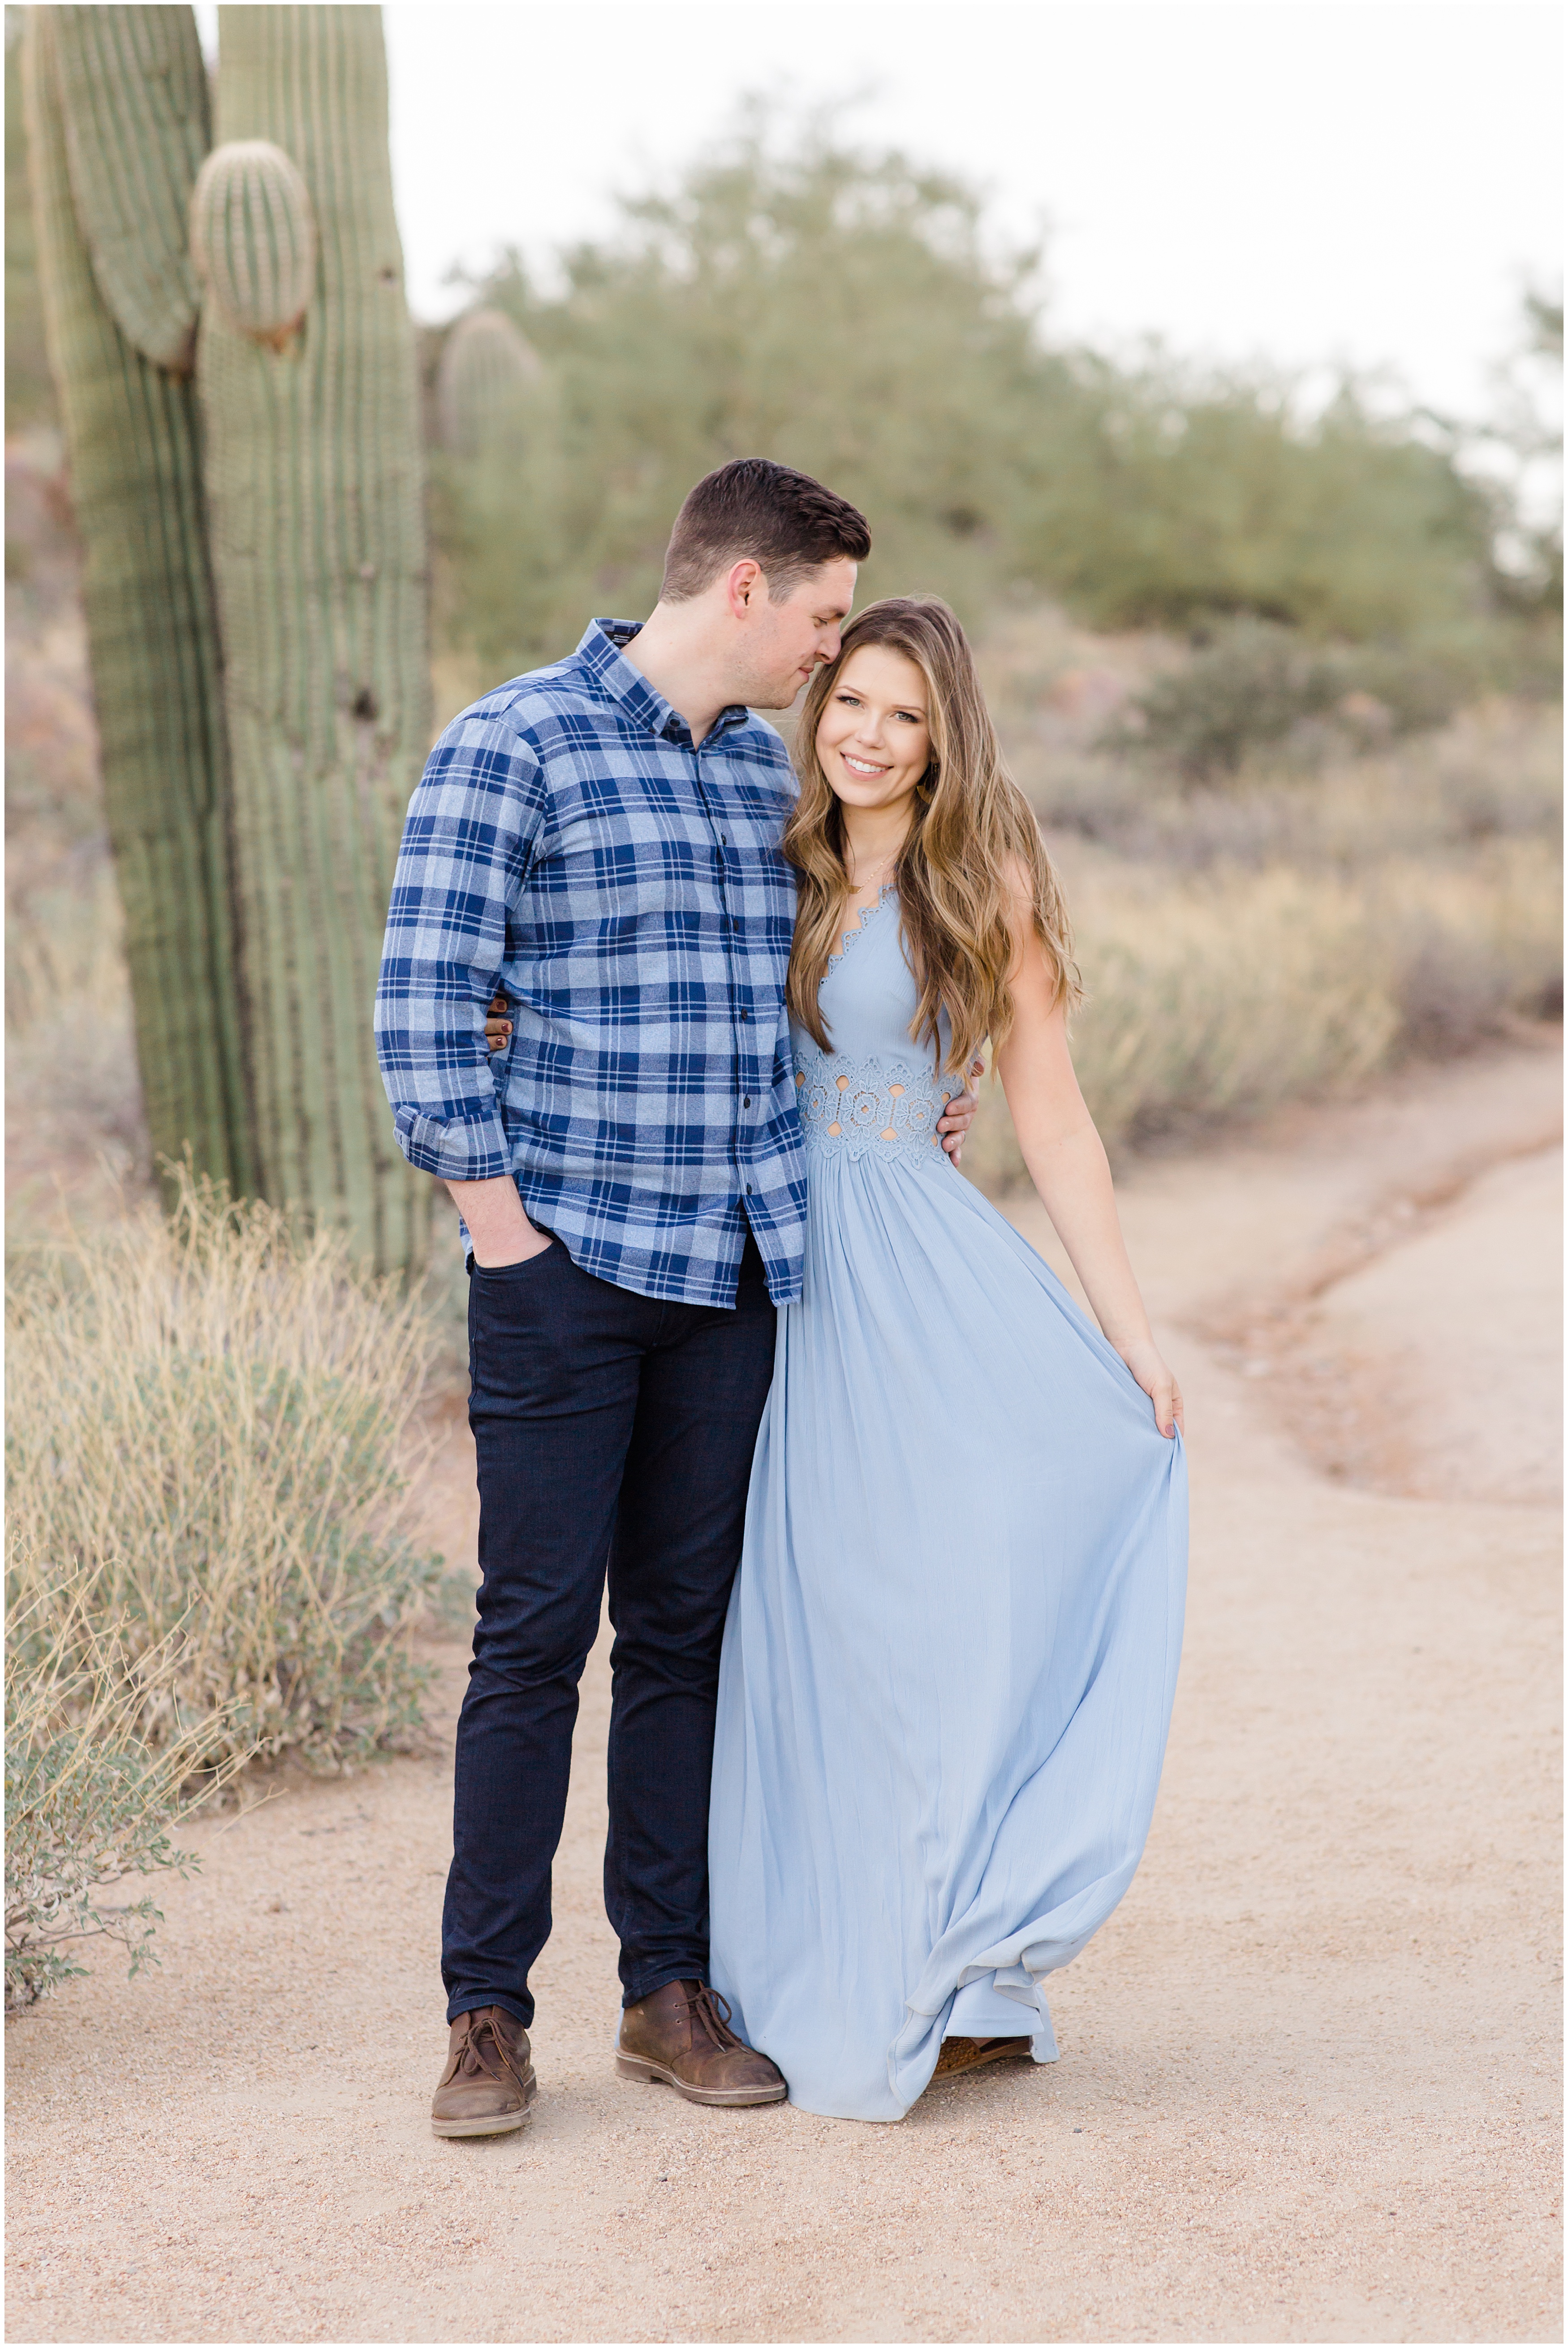 A gorgeous sunset anniversary session in Scottsdale, Arizona by photographer Courtney Bosworth